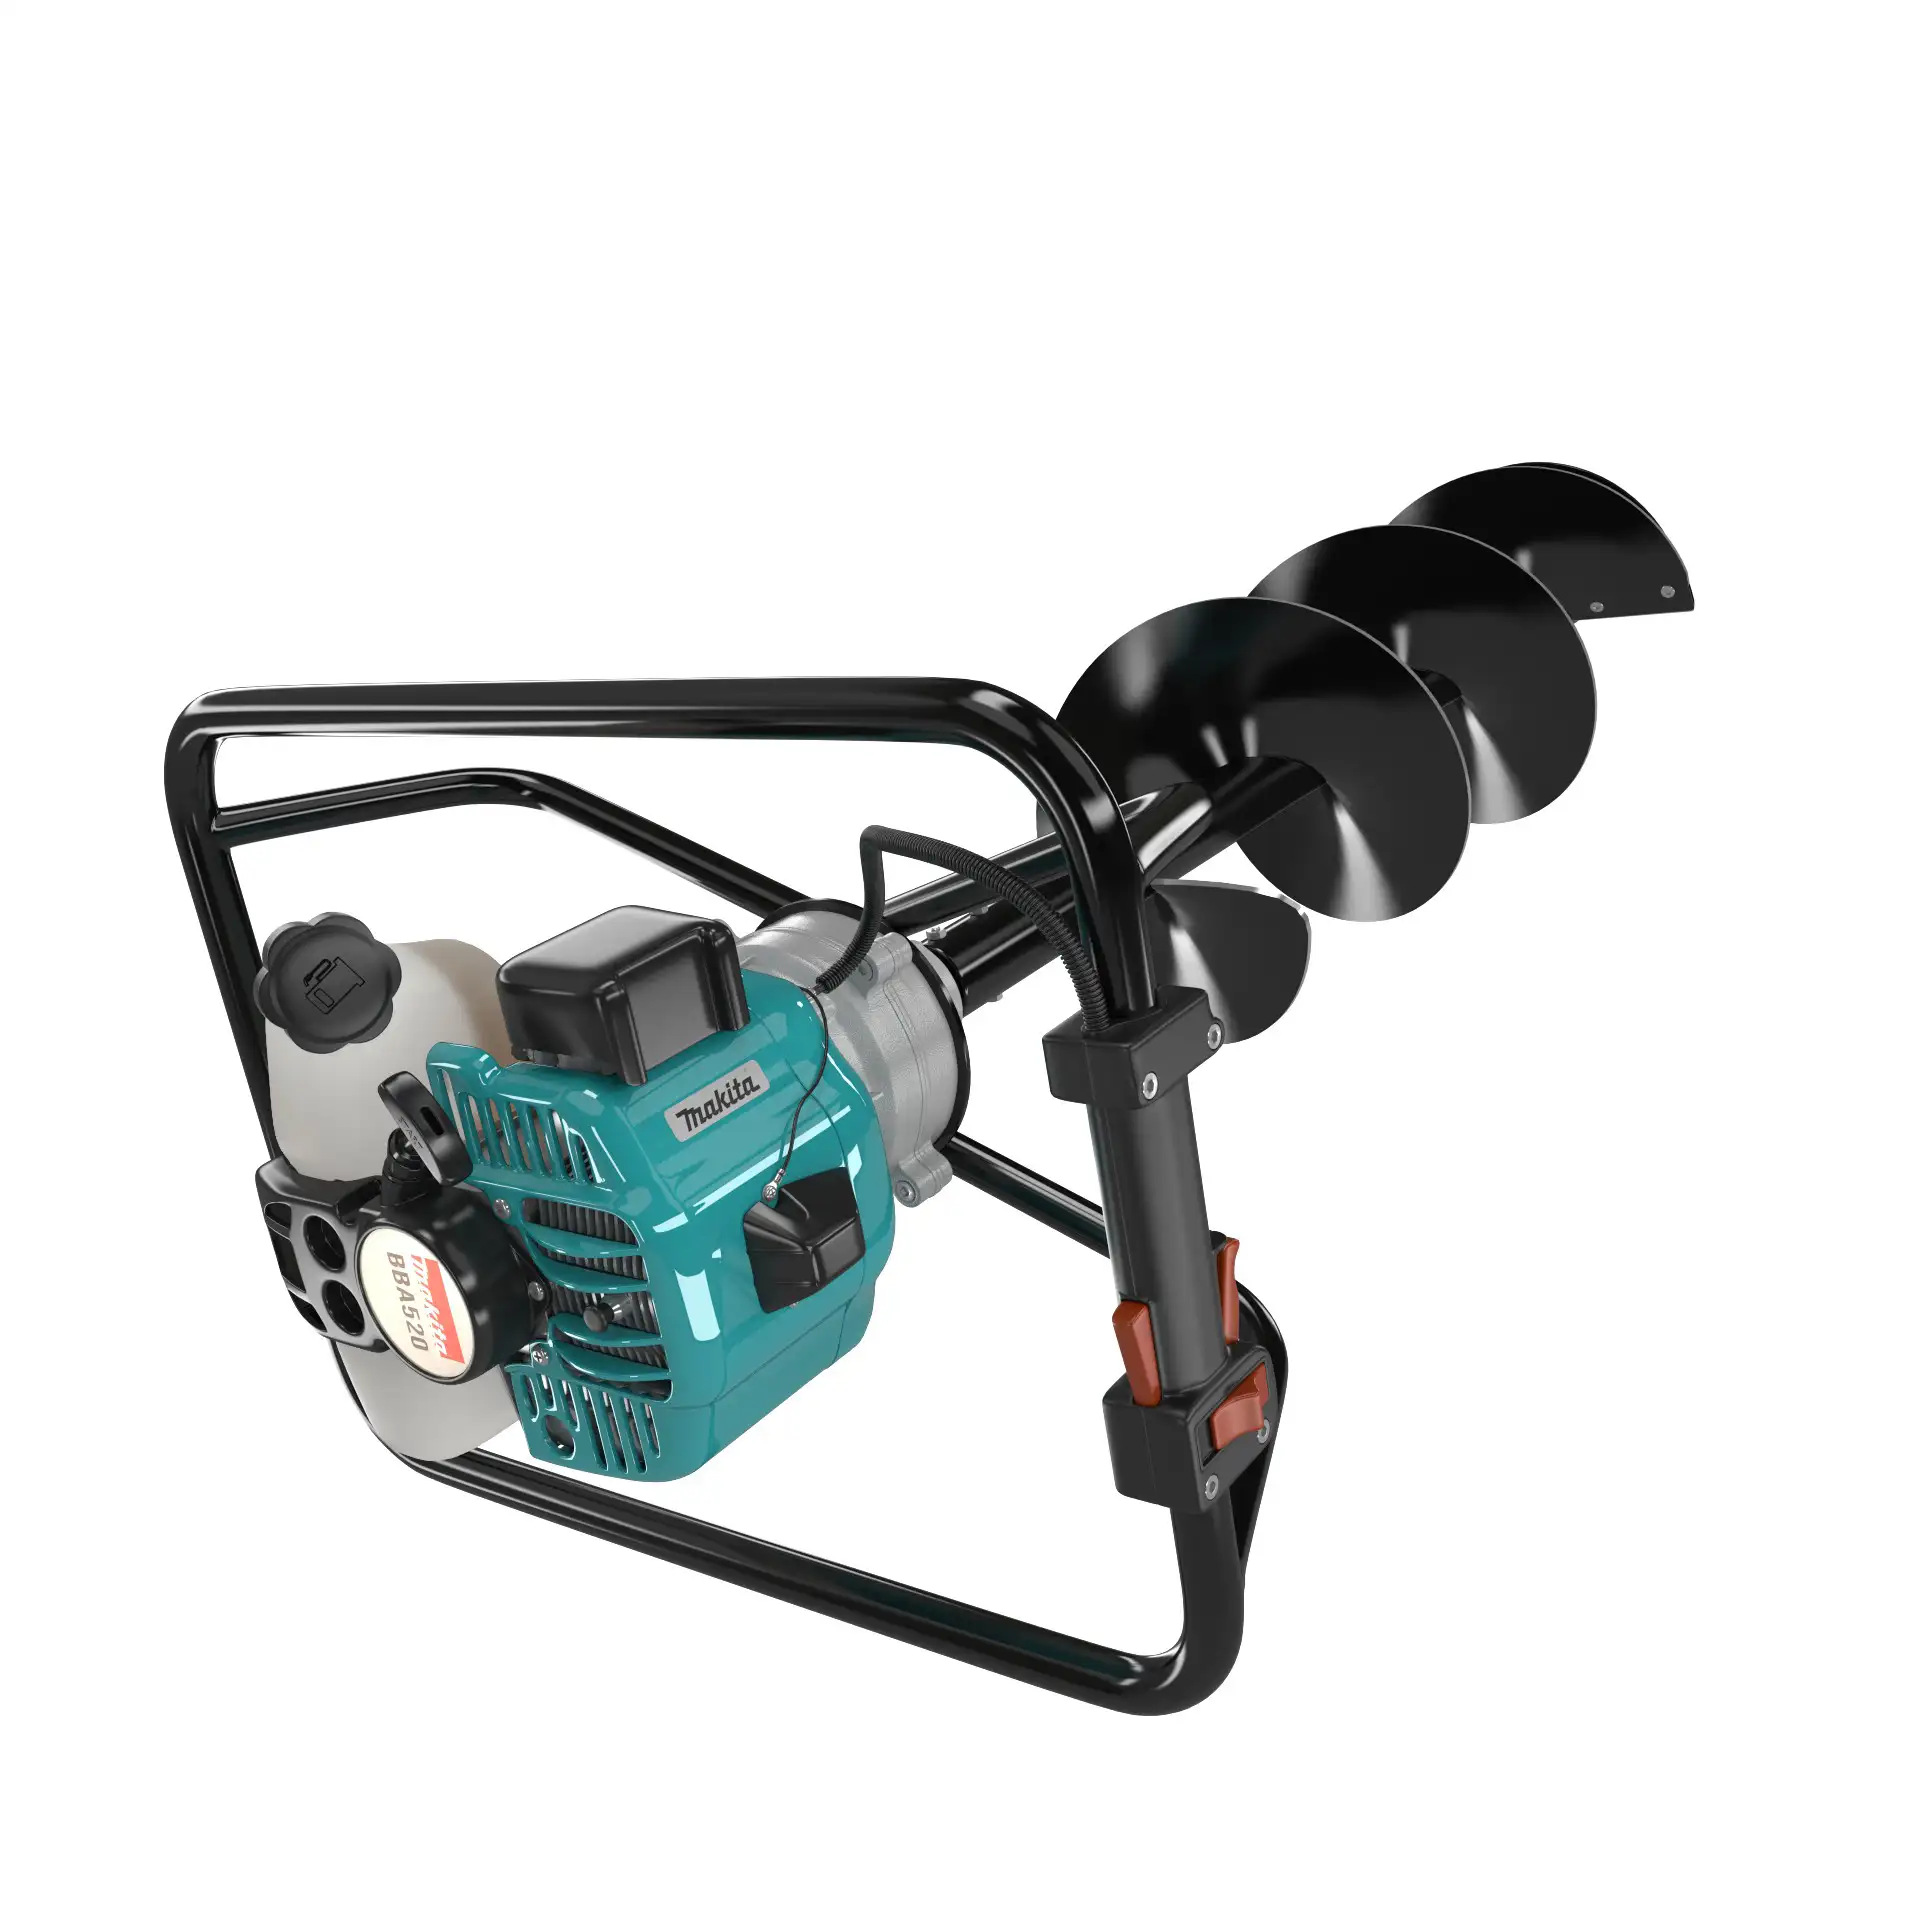 Render of Hole Borer / Earth Auger / Ground Drill Makita